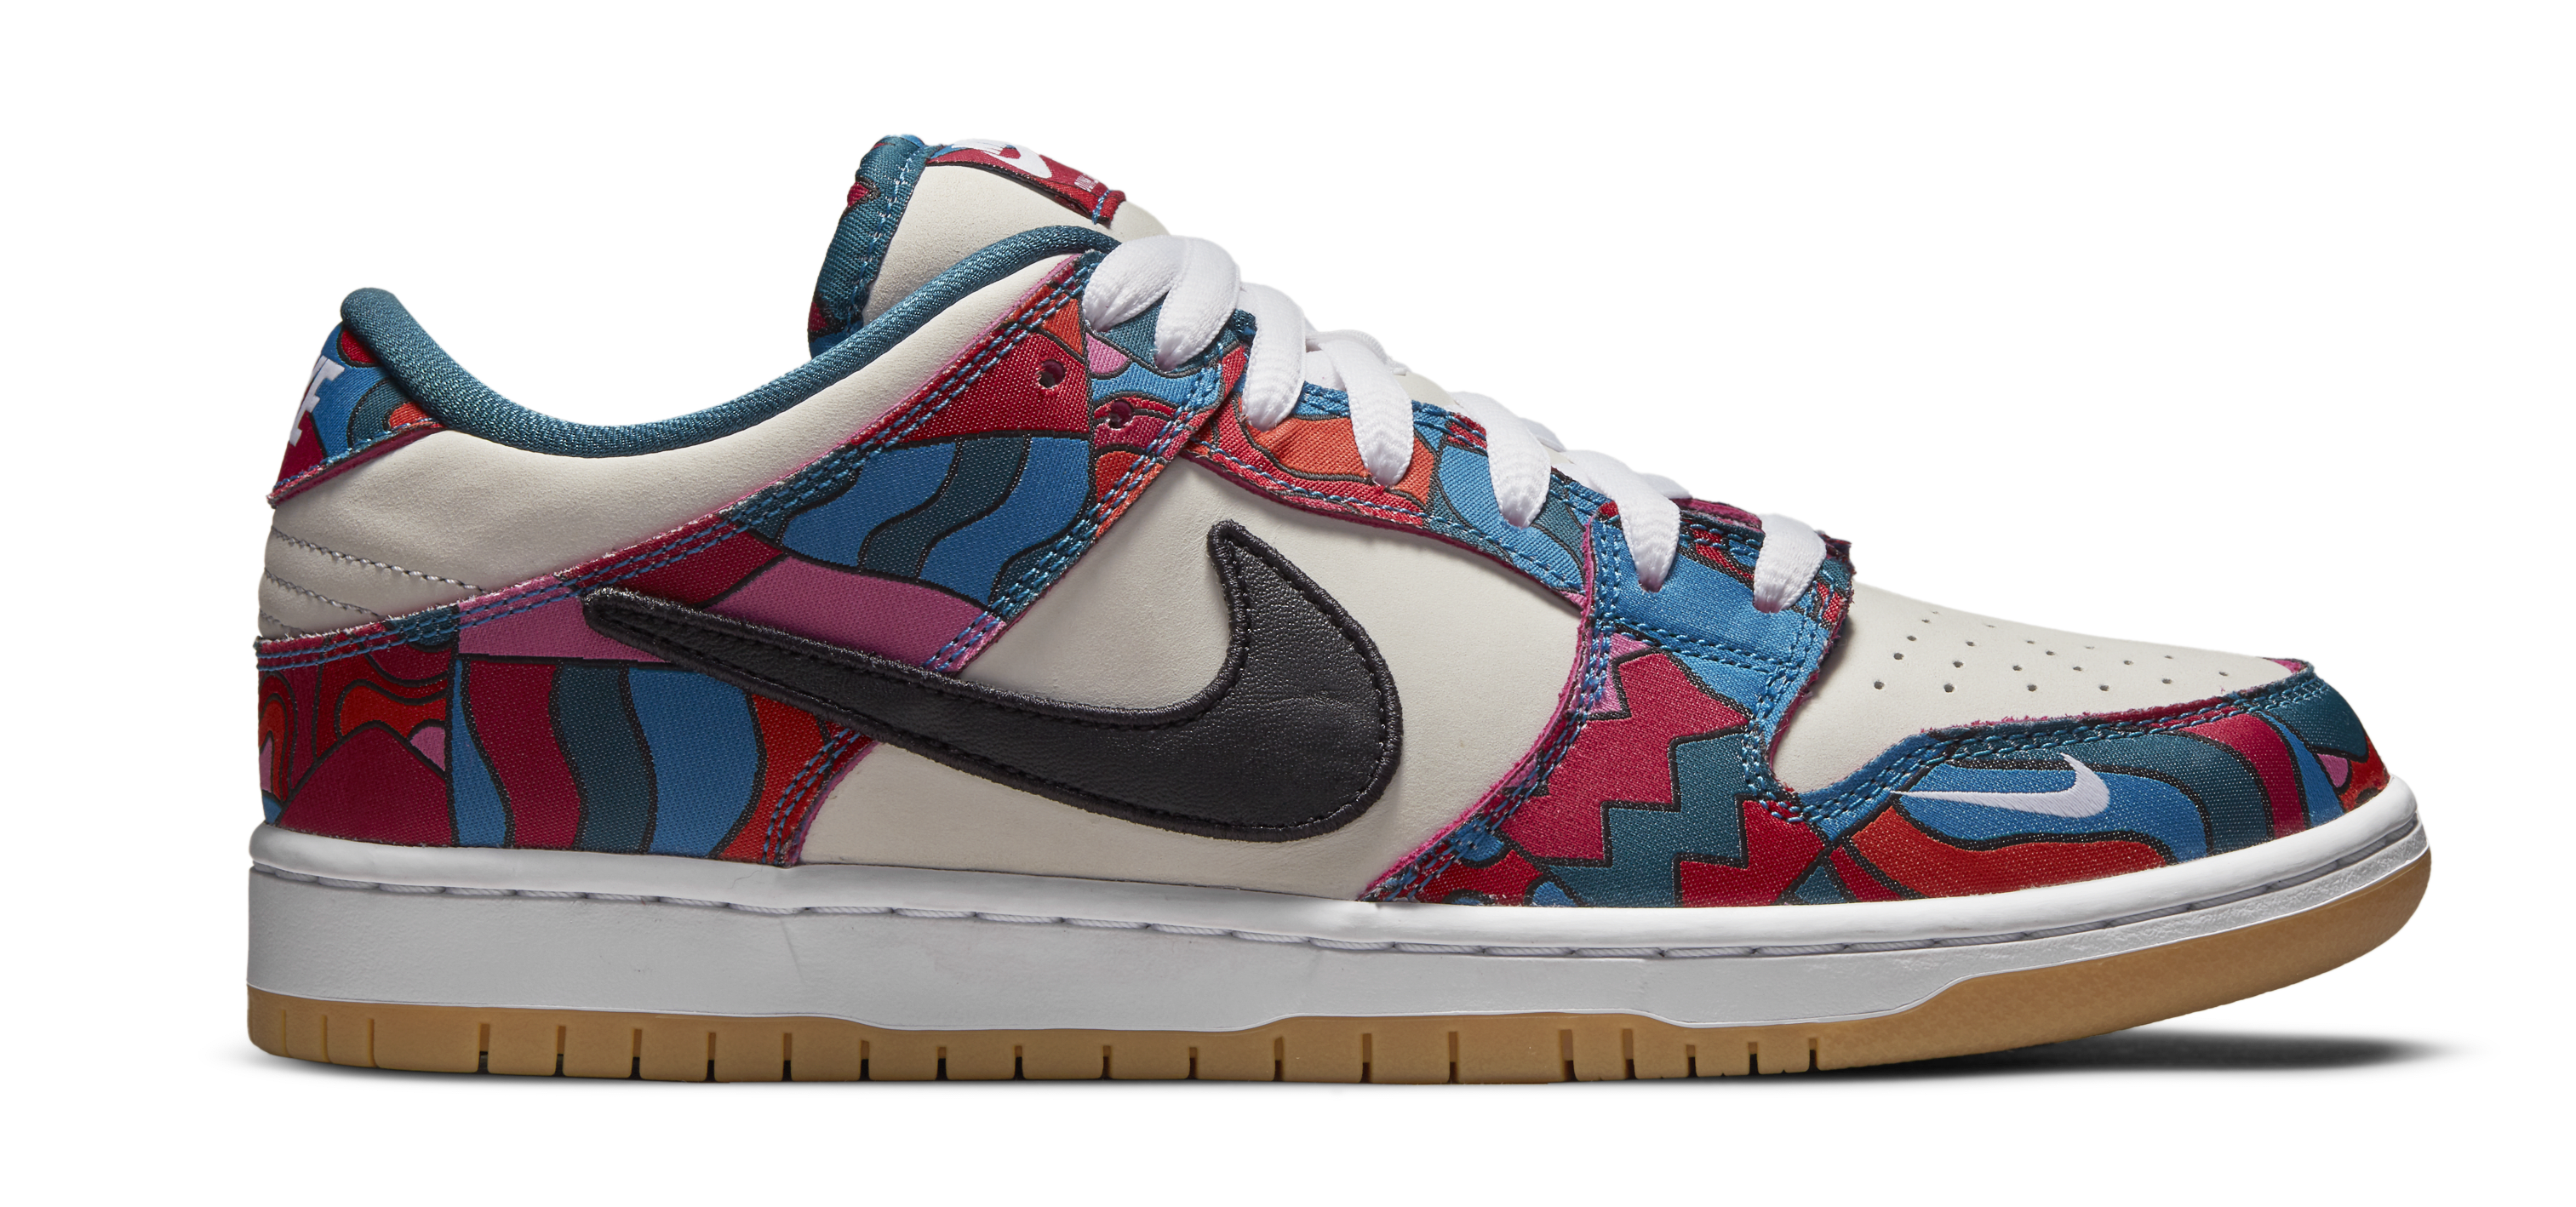 Parra x Nike SB Dunk Low DH7695-600 Lateral